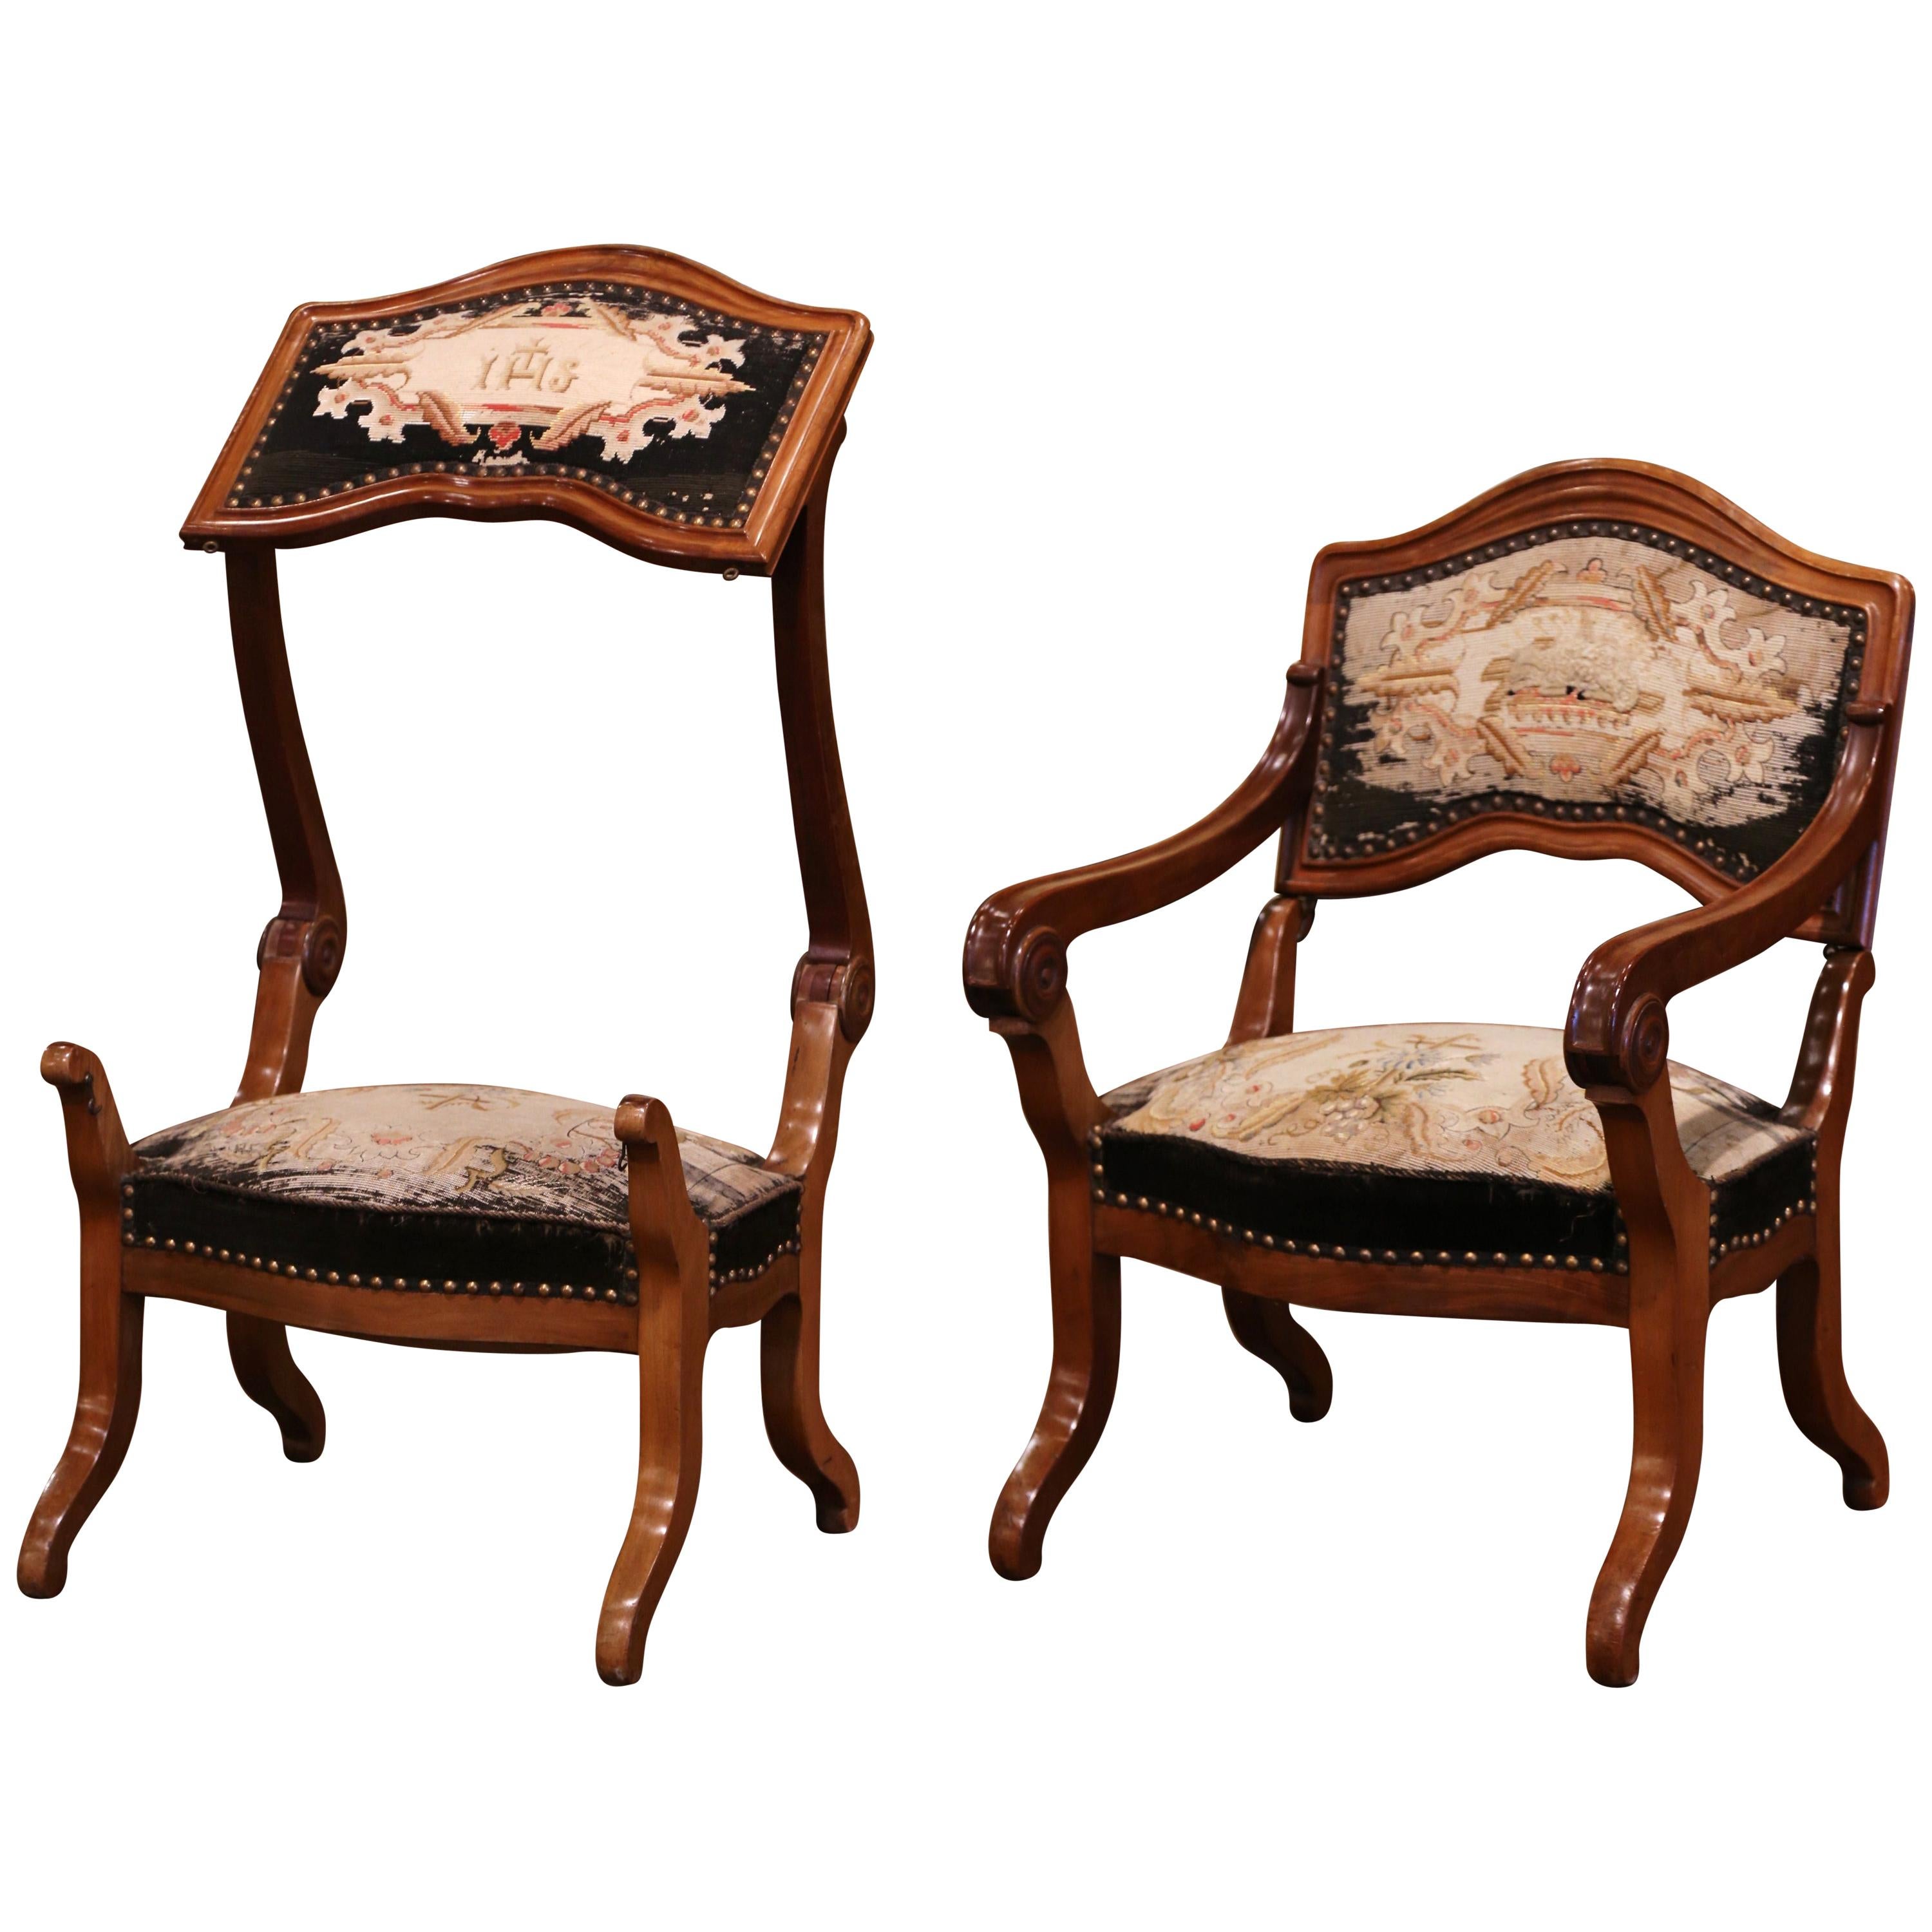 19th Century French Walnut and Tapestry Armchair Convertible to Prayer Kneeler